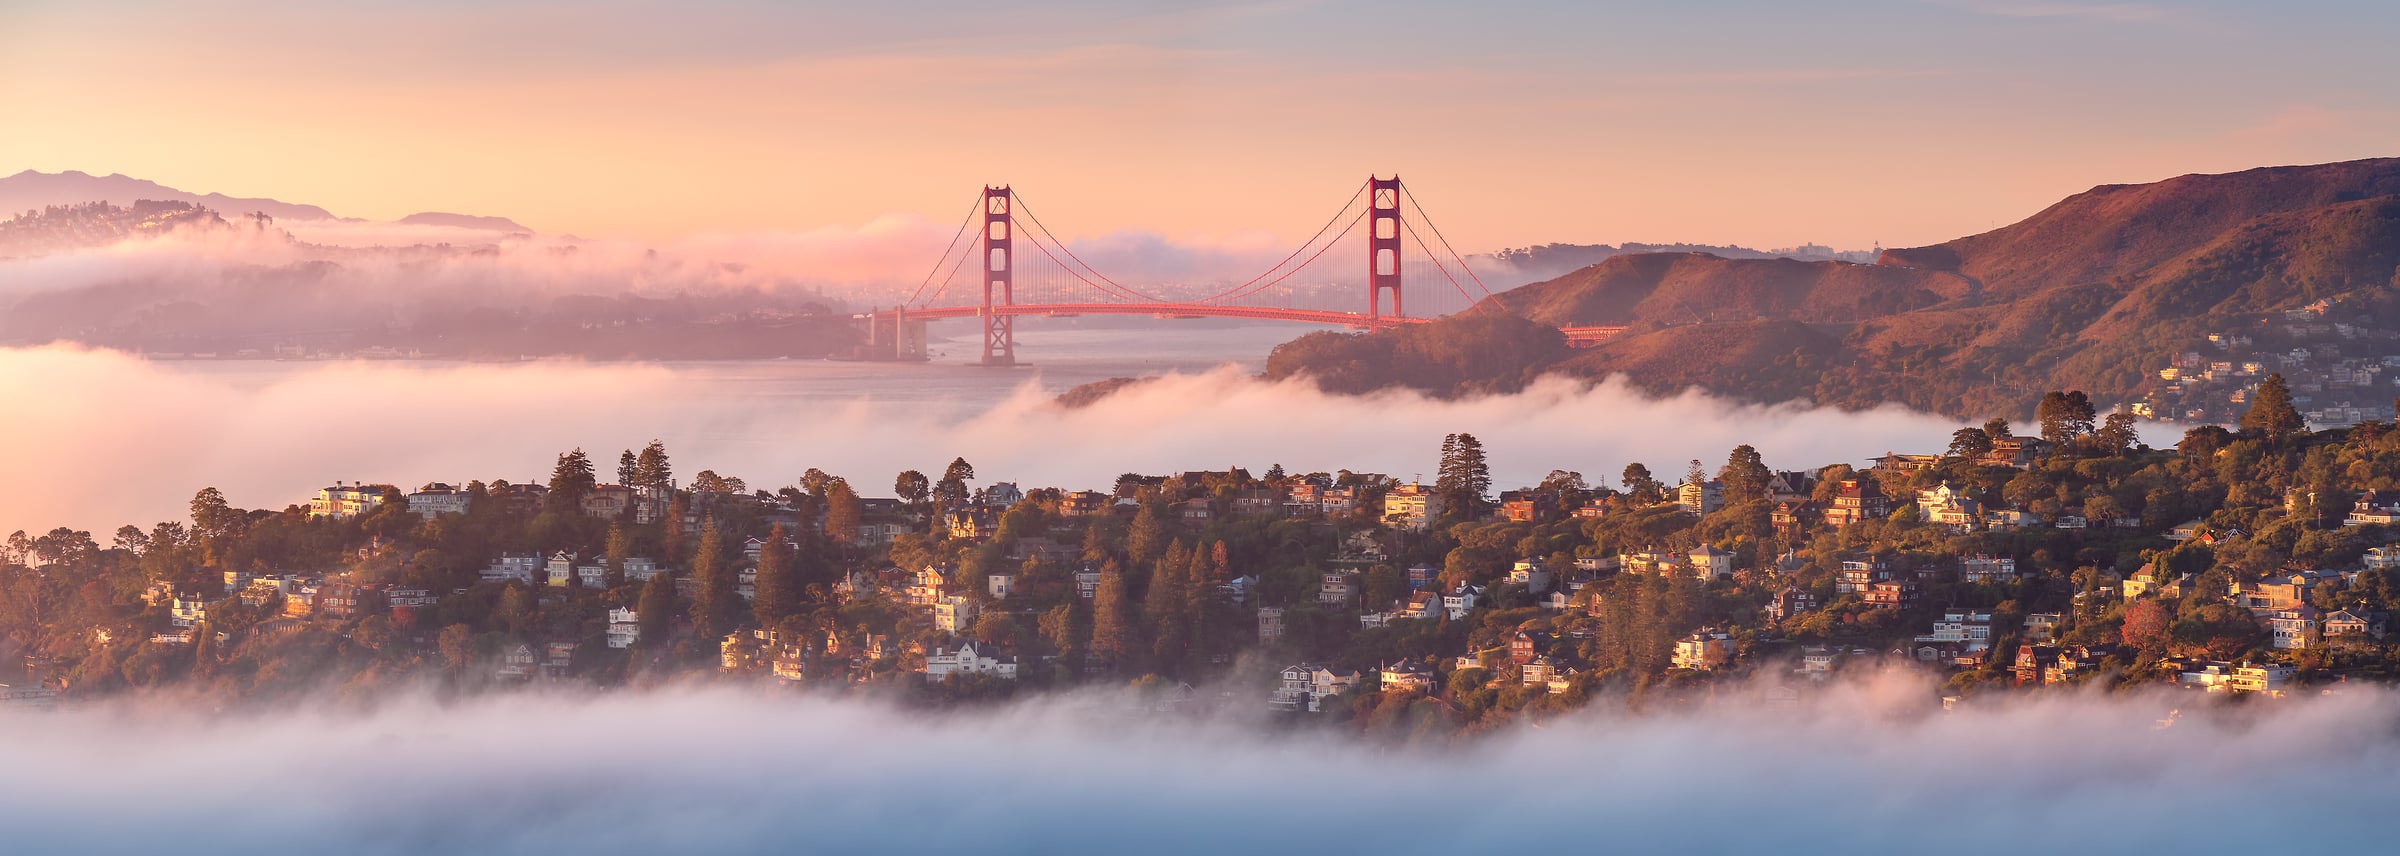 107 megapixels! A very high resolution, large-format VAST photo of Tiburon, California with the Golden Gate Bridge in the background; landscape photograph created by Jeff Lewis